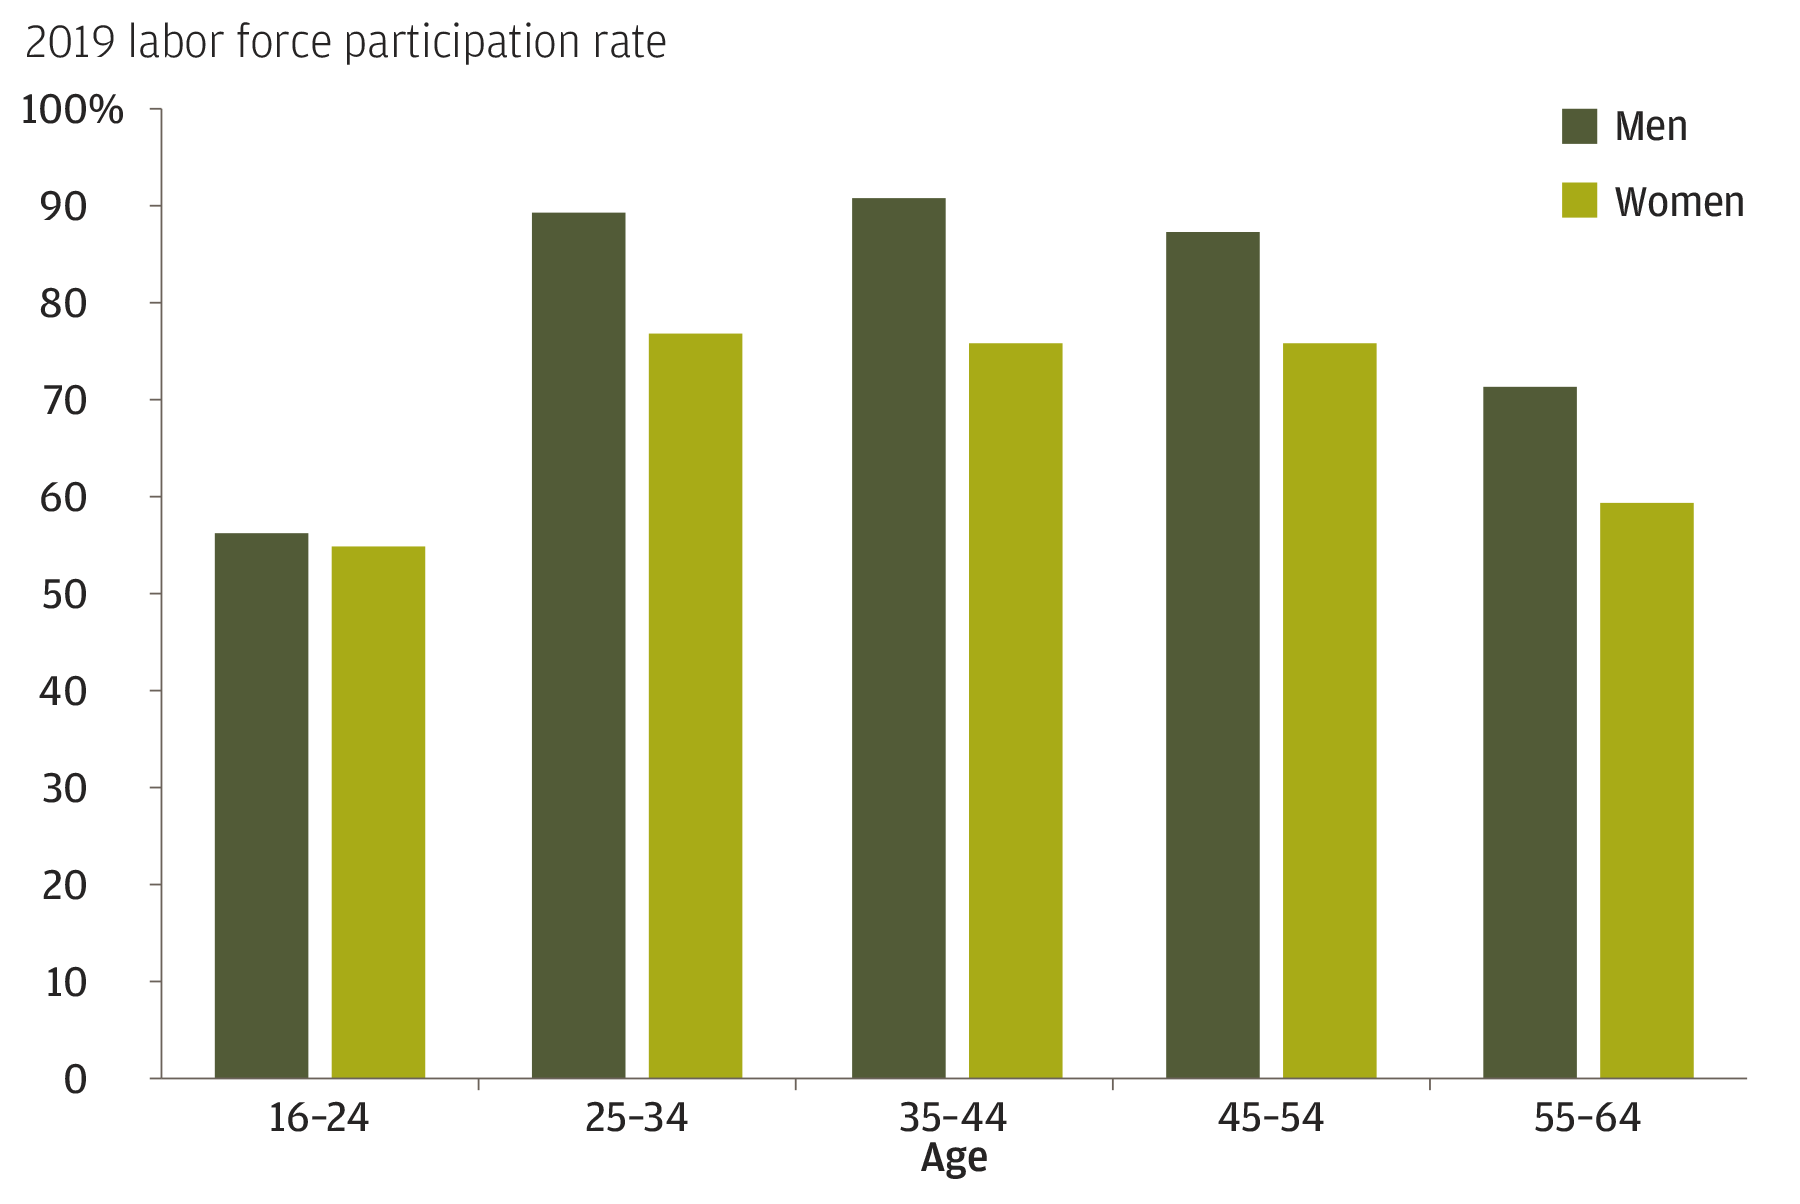 Chart 2: This bar chart presents the labor participation rates of men versus women across multiple age groups from 16 to 64 years of age. The participation rates of men and women are about the same in the 16–24 age group (at ~55%); however, beyond this age group there is a significant gap between the participation rates of men and women. As such, for all other age groups, the column representing men is taller than the column representing women. The gap between the participation rates of men and women is the largest in the 35–44 age range, at around 15%.